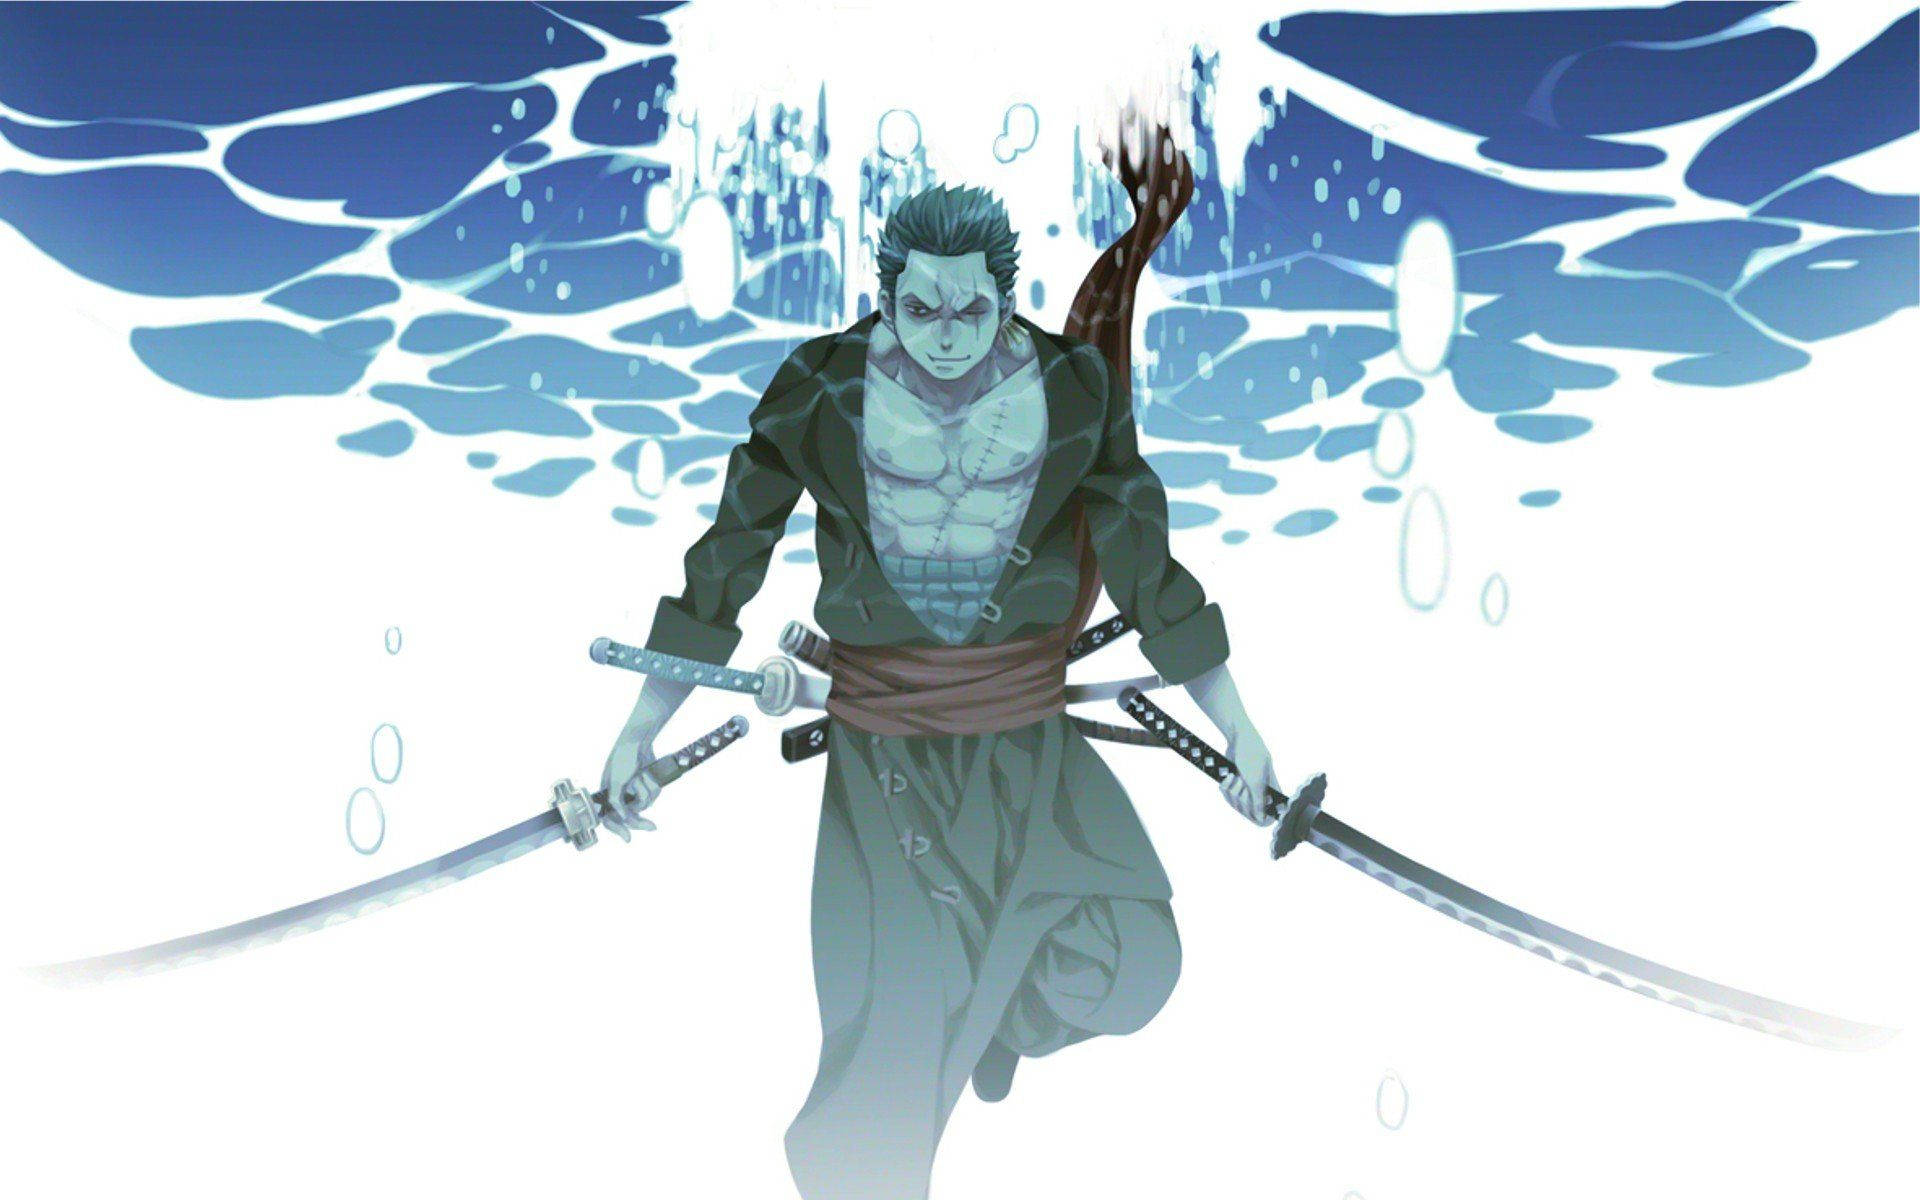 Image Roronoa Zoro Battling His Enemy In The Ocean Background